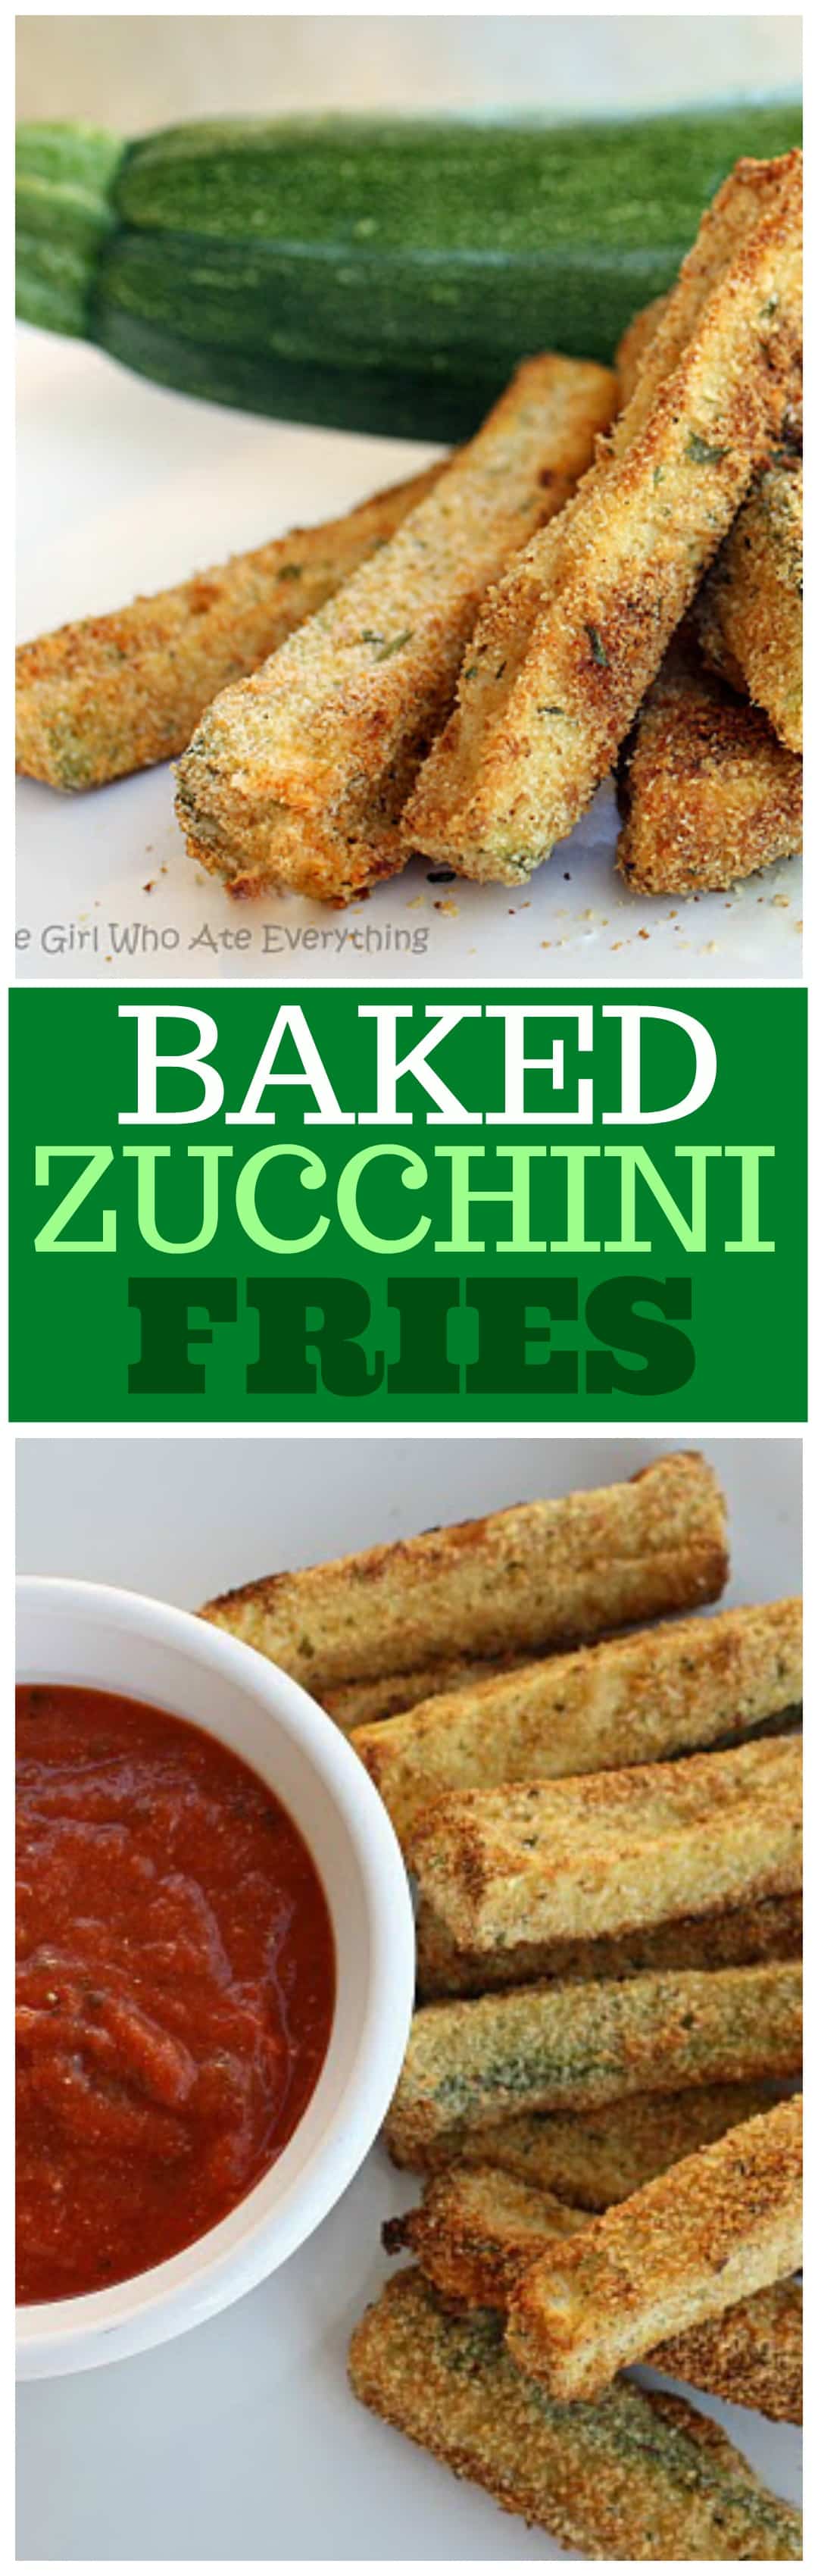 Baked Zucchini Fries - healthy and so good your kids will even eat them. the-girl-who-ate-everything.com